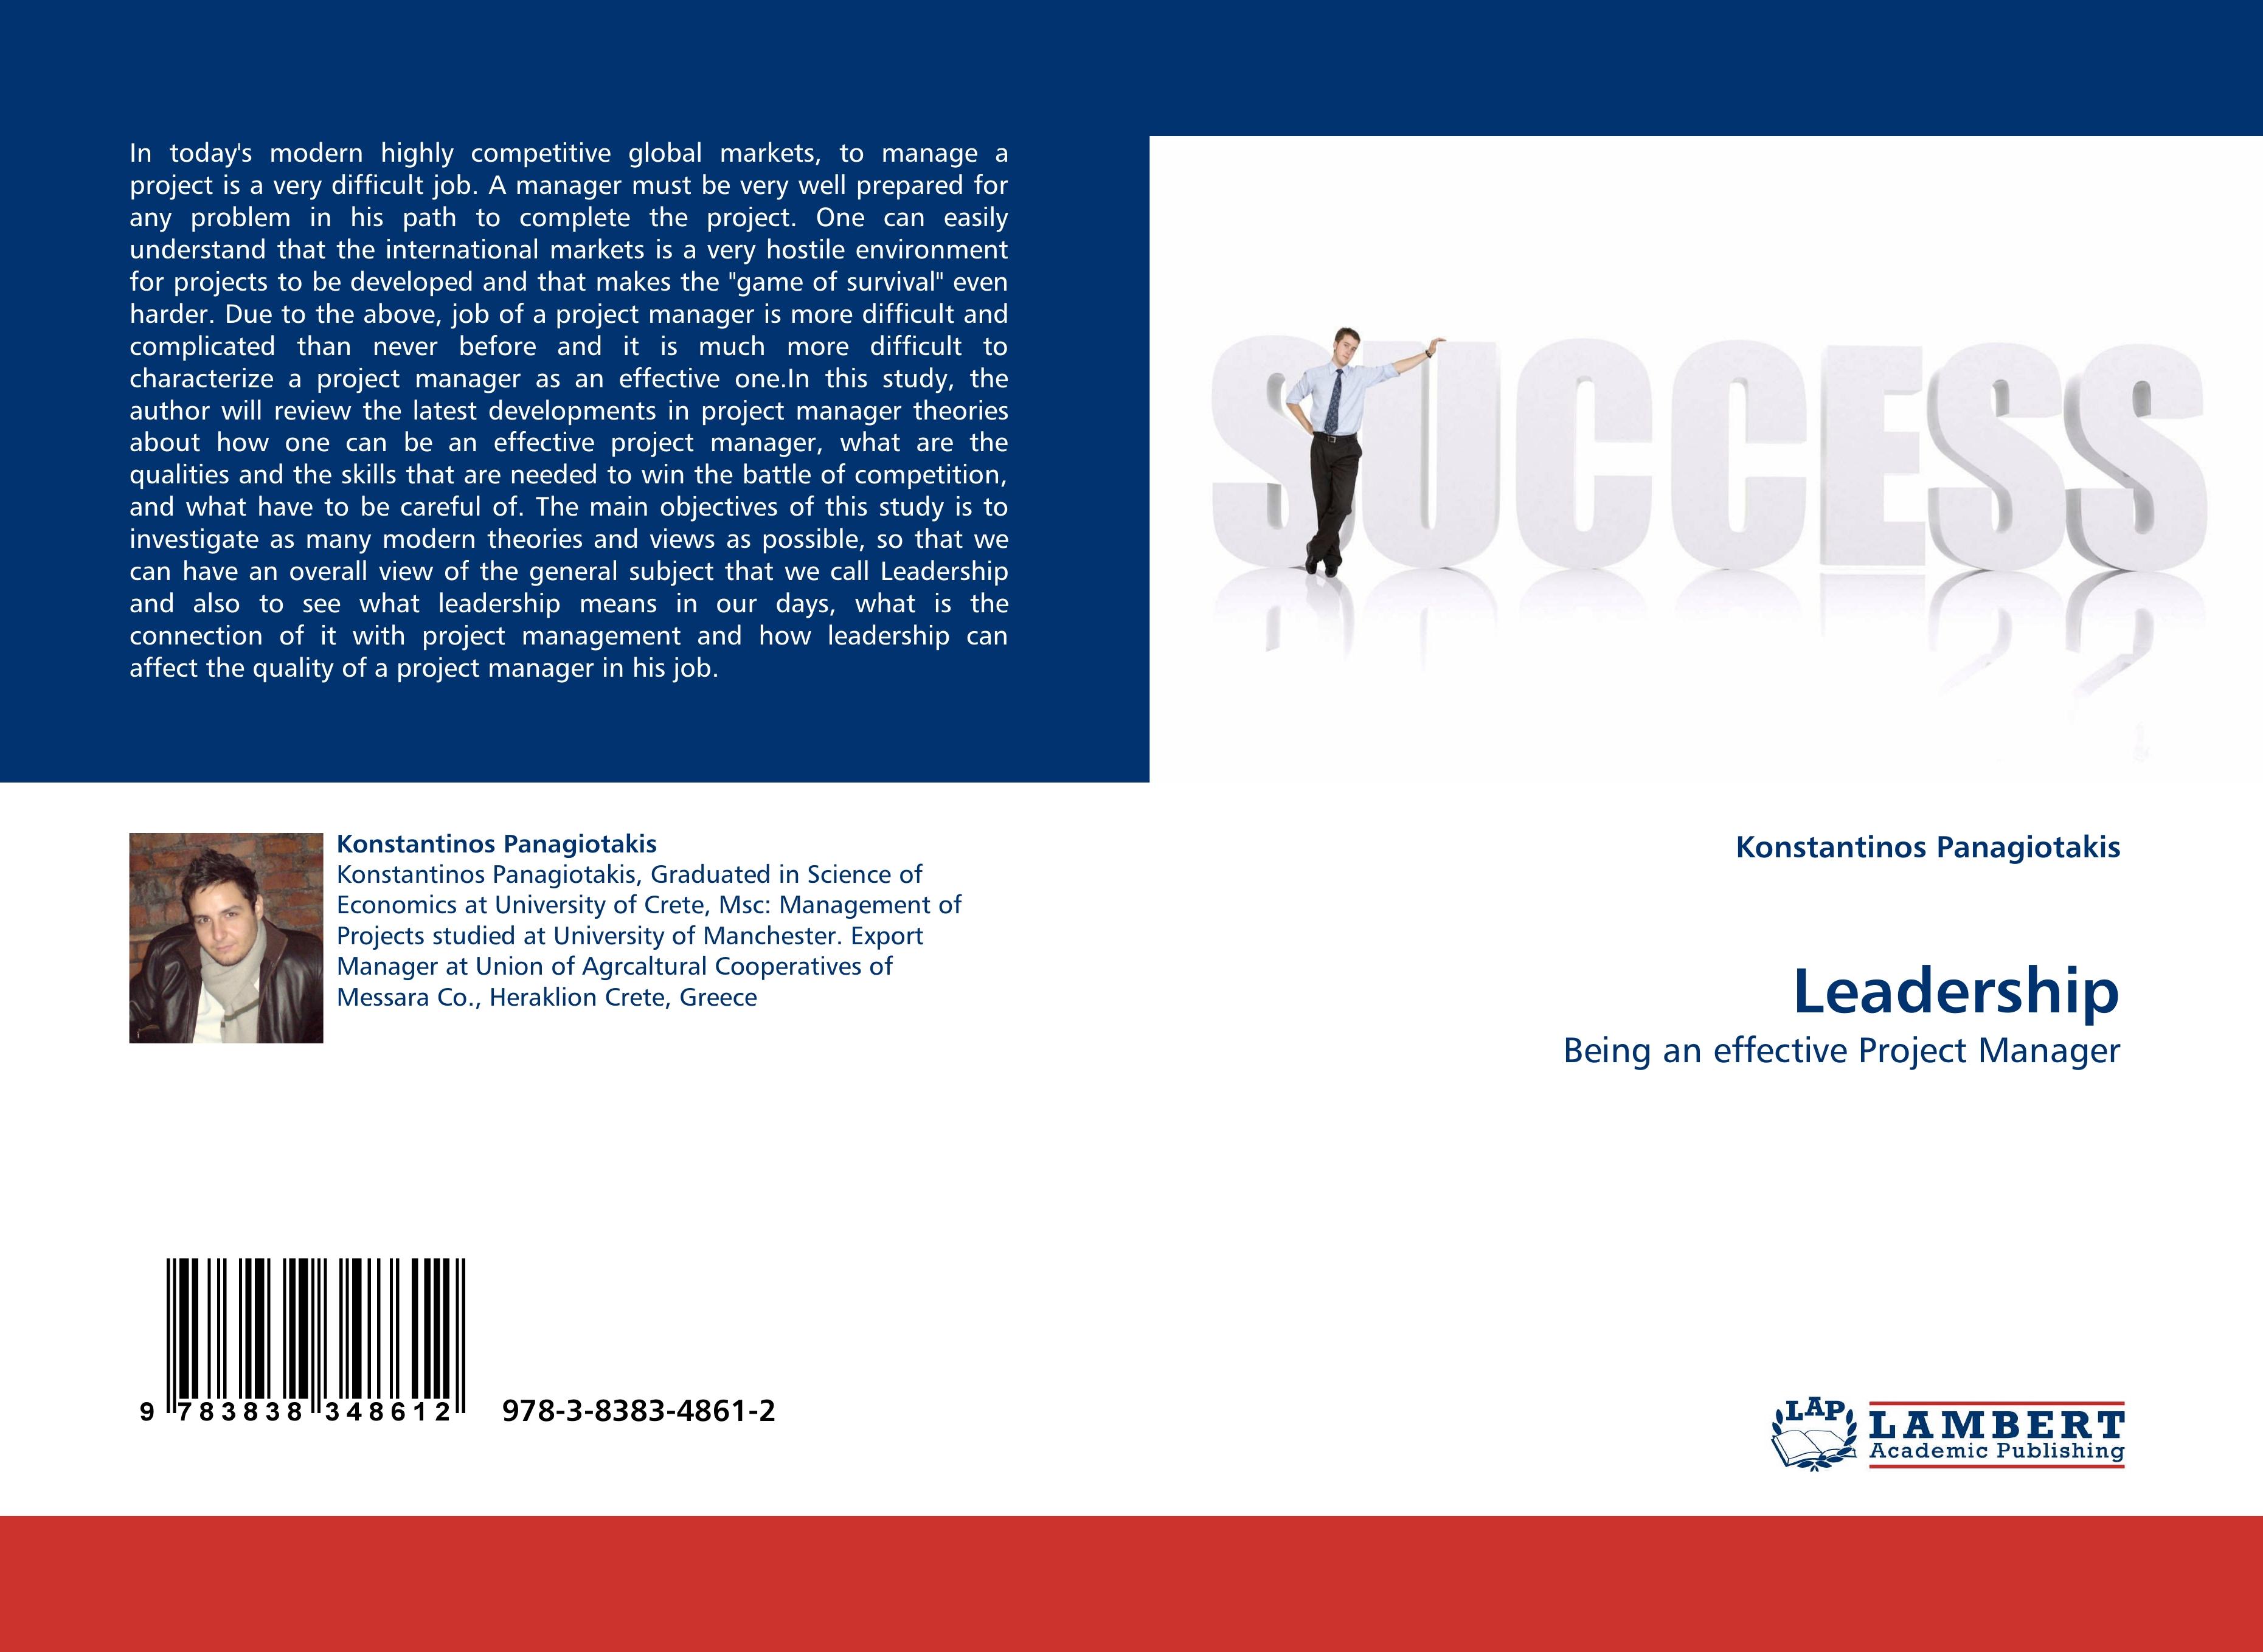 Leadership / Being an effective Project Manager / Konstantinos Panagiotakis / Taschenbuch / Paperback / 84 S. / Englisch / 2010 / LAP LAMBERT Academic Publishing / EAN 9783838348612 - Panagiotakis, Konstantinos